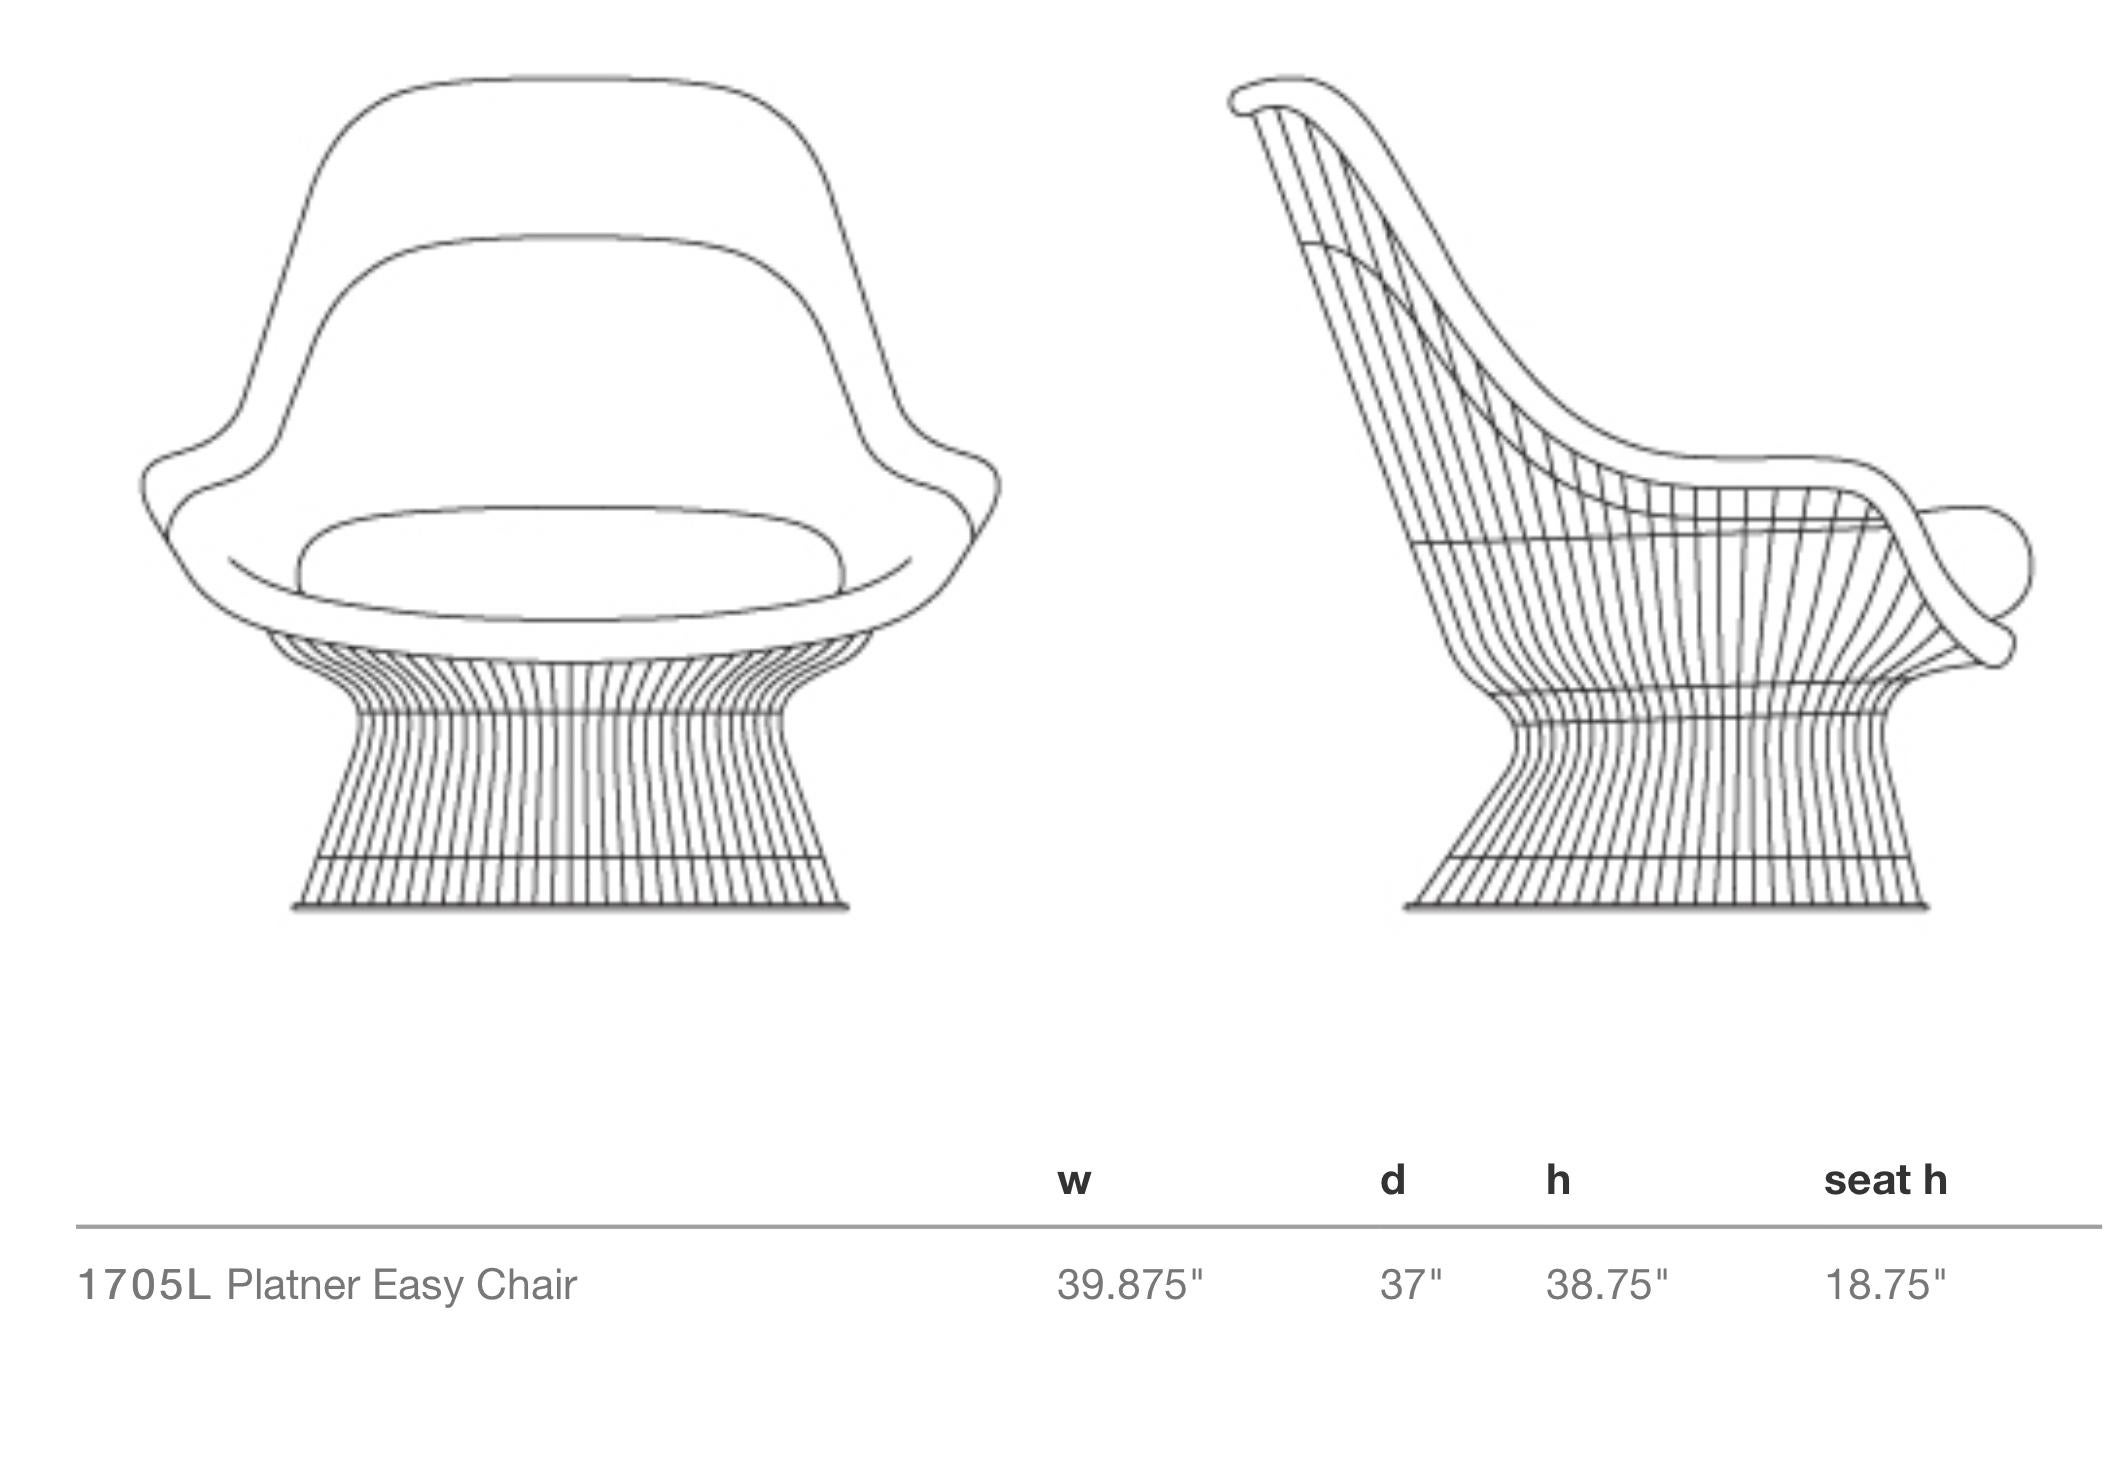 Warren platner gray leather easy chair and ottoman set of two, Knoll, 1966. Knoll Models 1705L and 1705Y. See final two images for proper dimensions.
Warren Platner for Knoll gray leather model 1705 wire easy lounge chair, 1966. Stunning set of